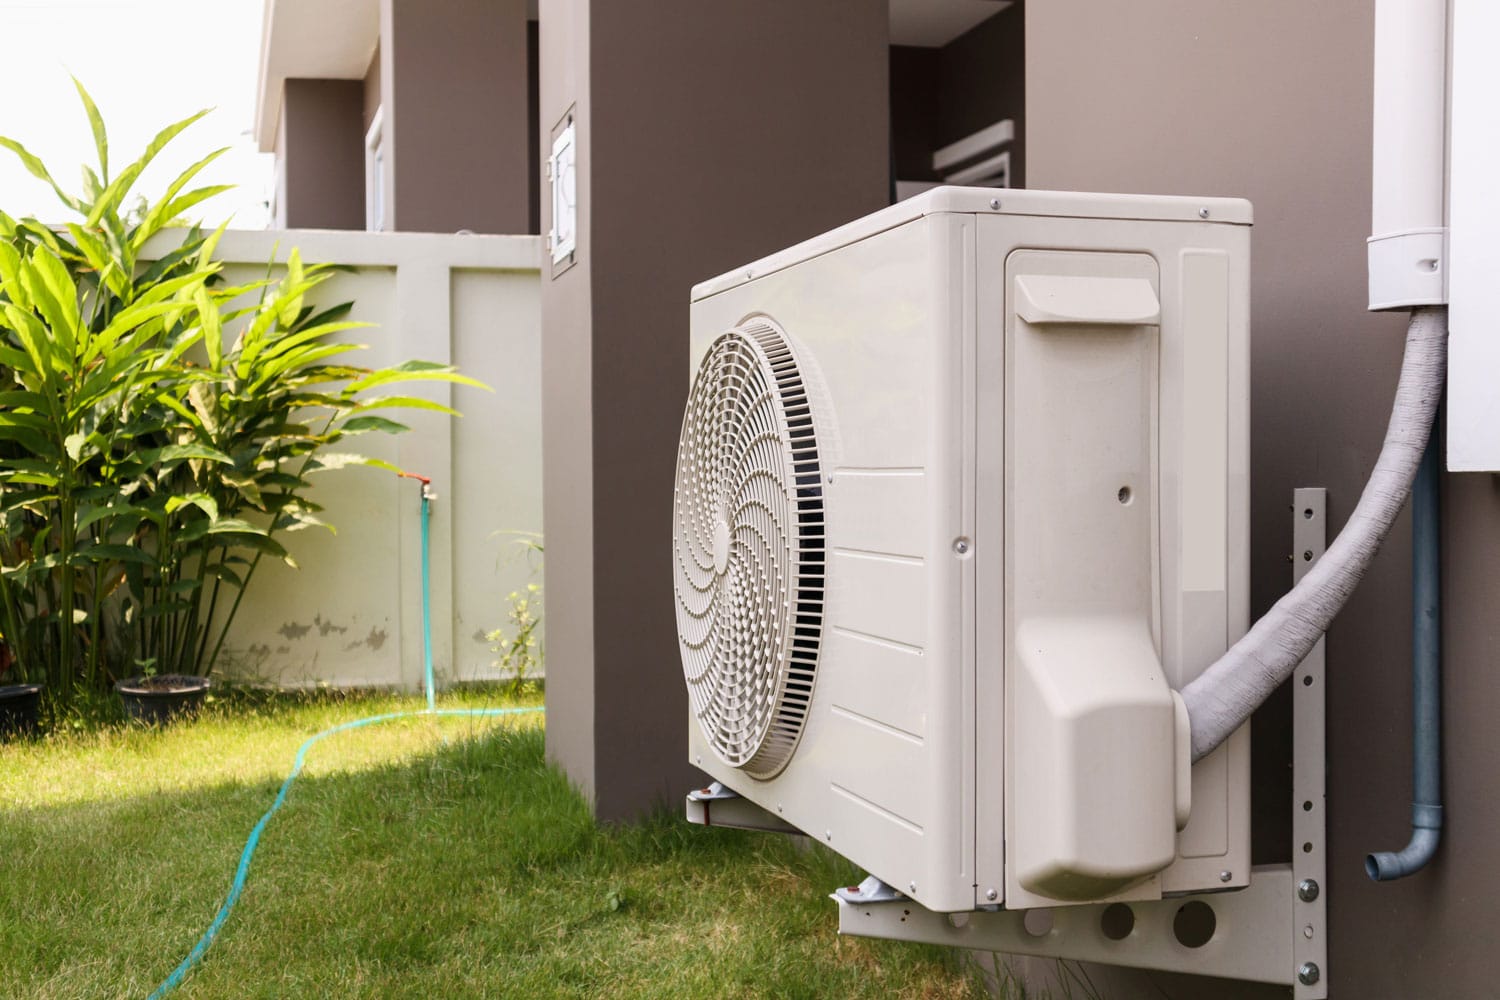 Outdoor Fan contineously run below several reasons